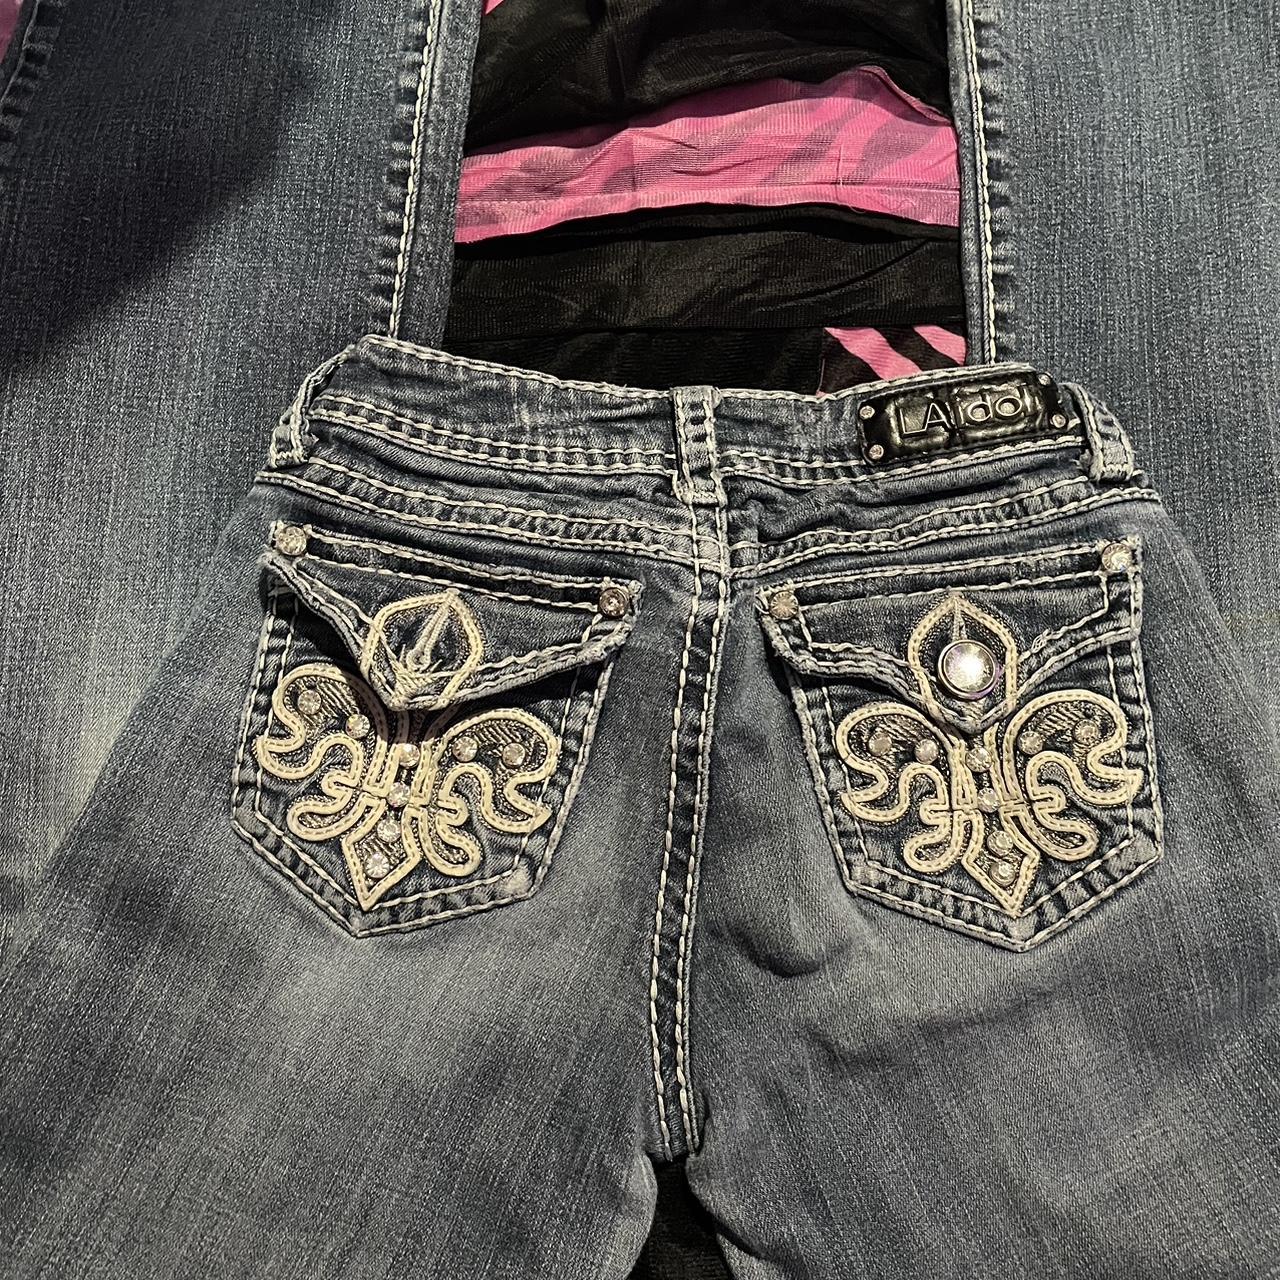 la idol straight jeans size 3 tiny stain on the... - Depop